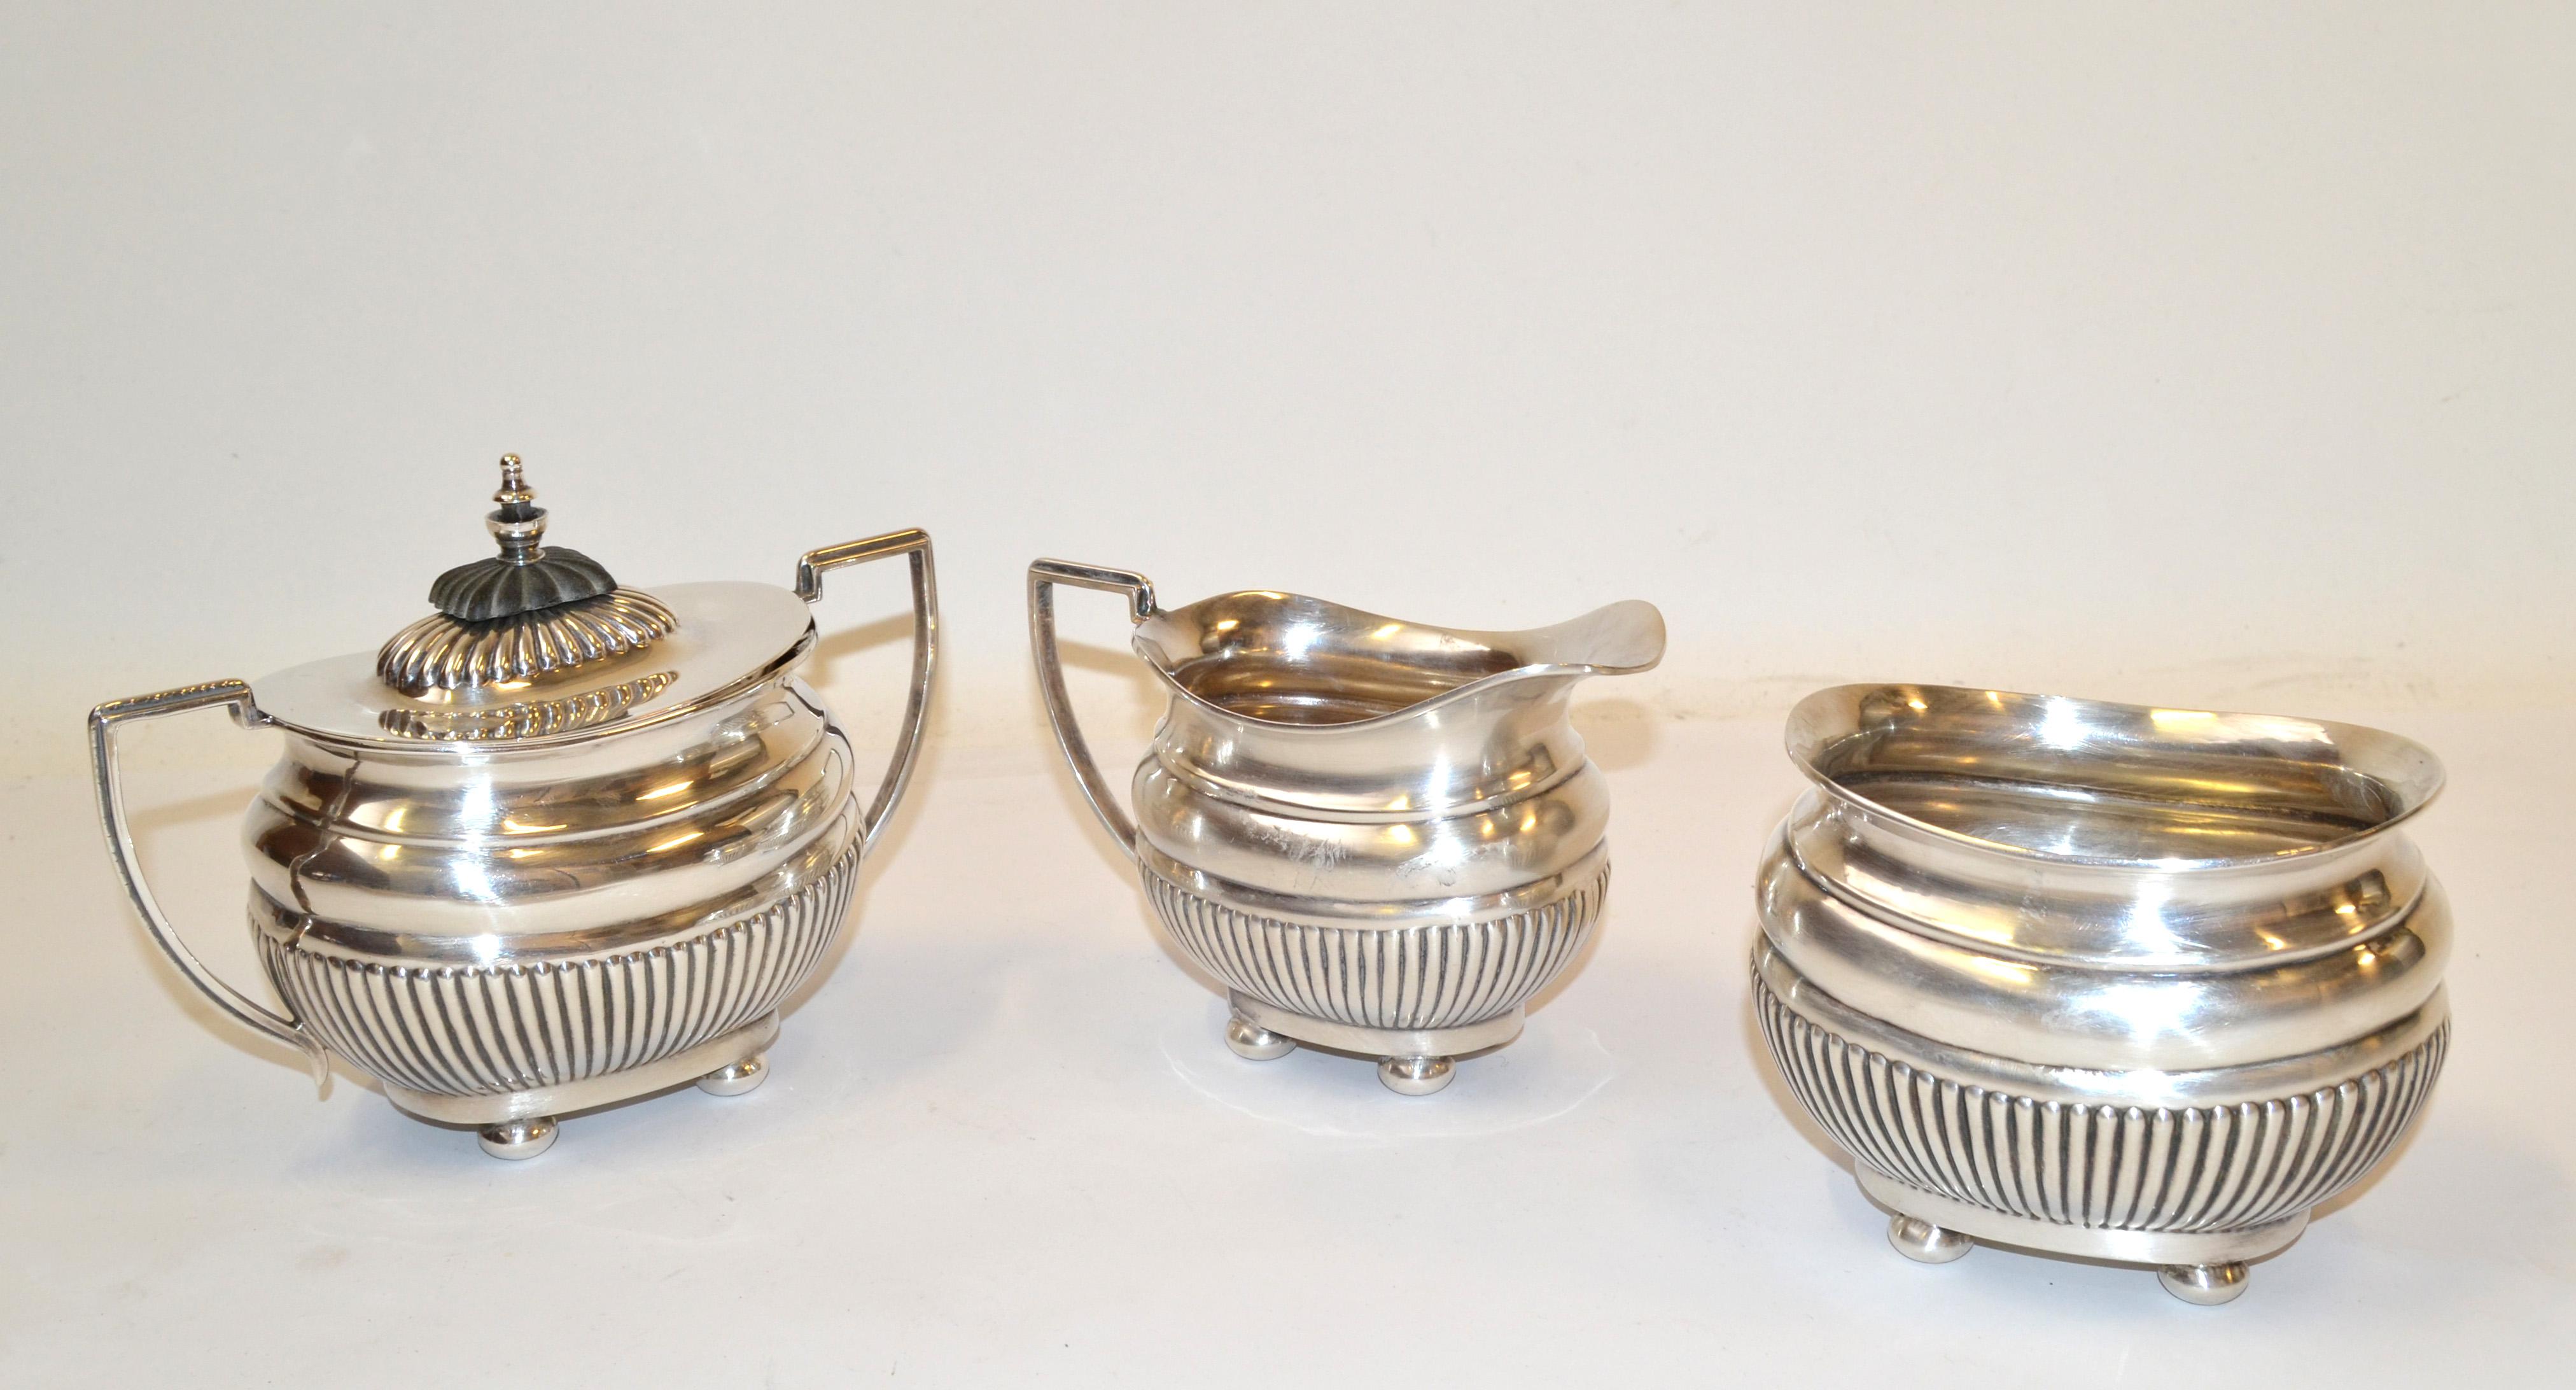 British Colonial Antique 1910 Cheltenham Silver Coffee Service Sheffield England For Sale 1